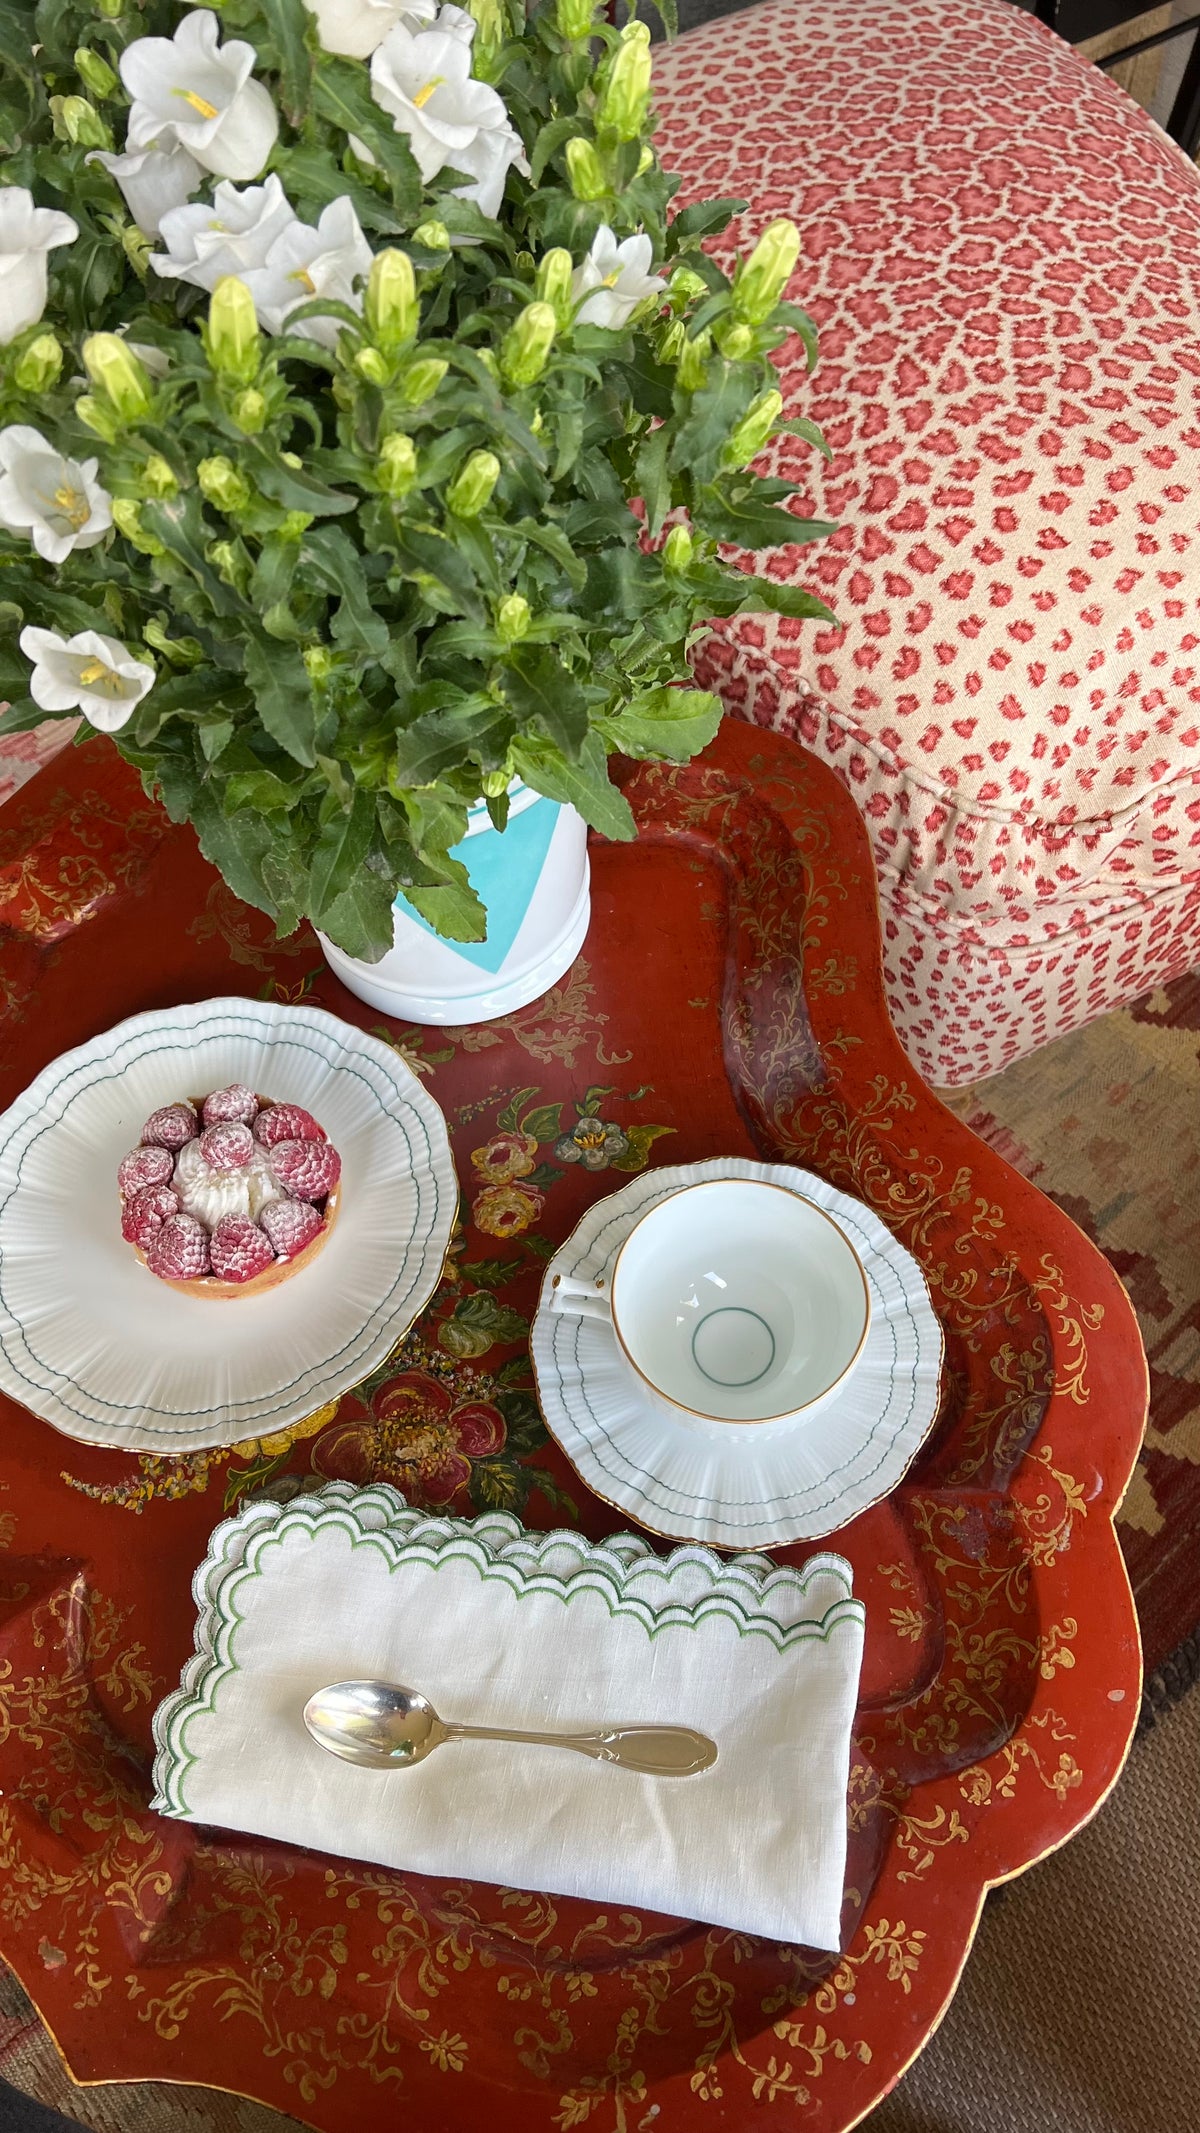 Coral Tea Cup With Plate